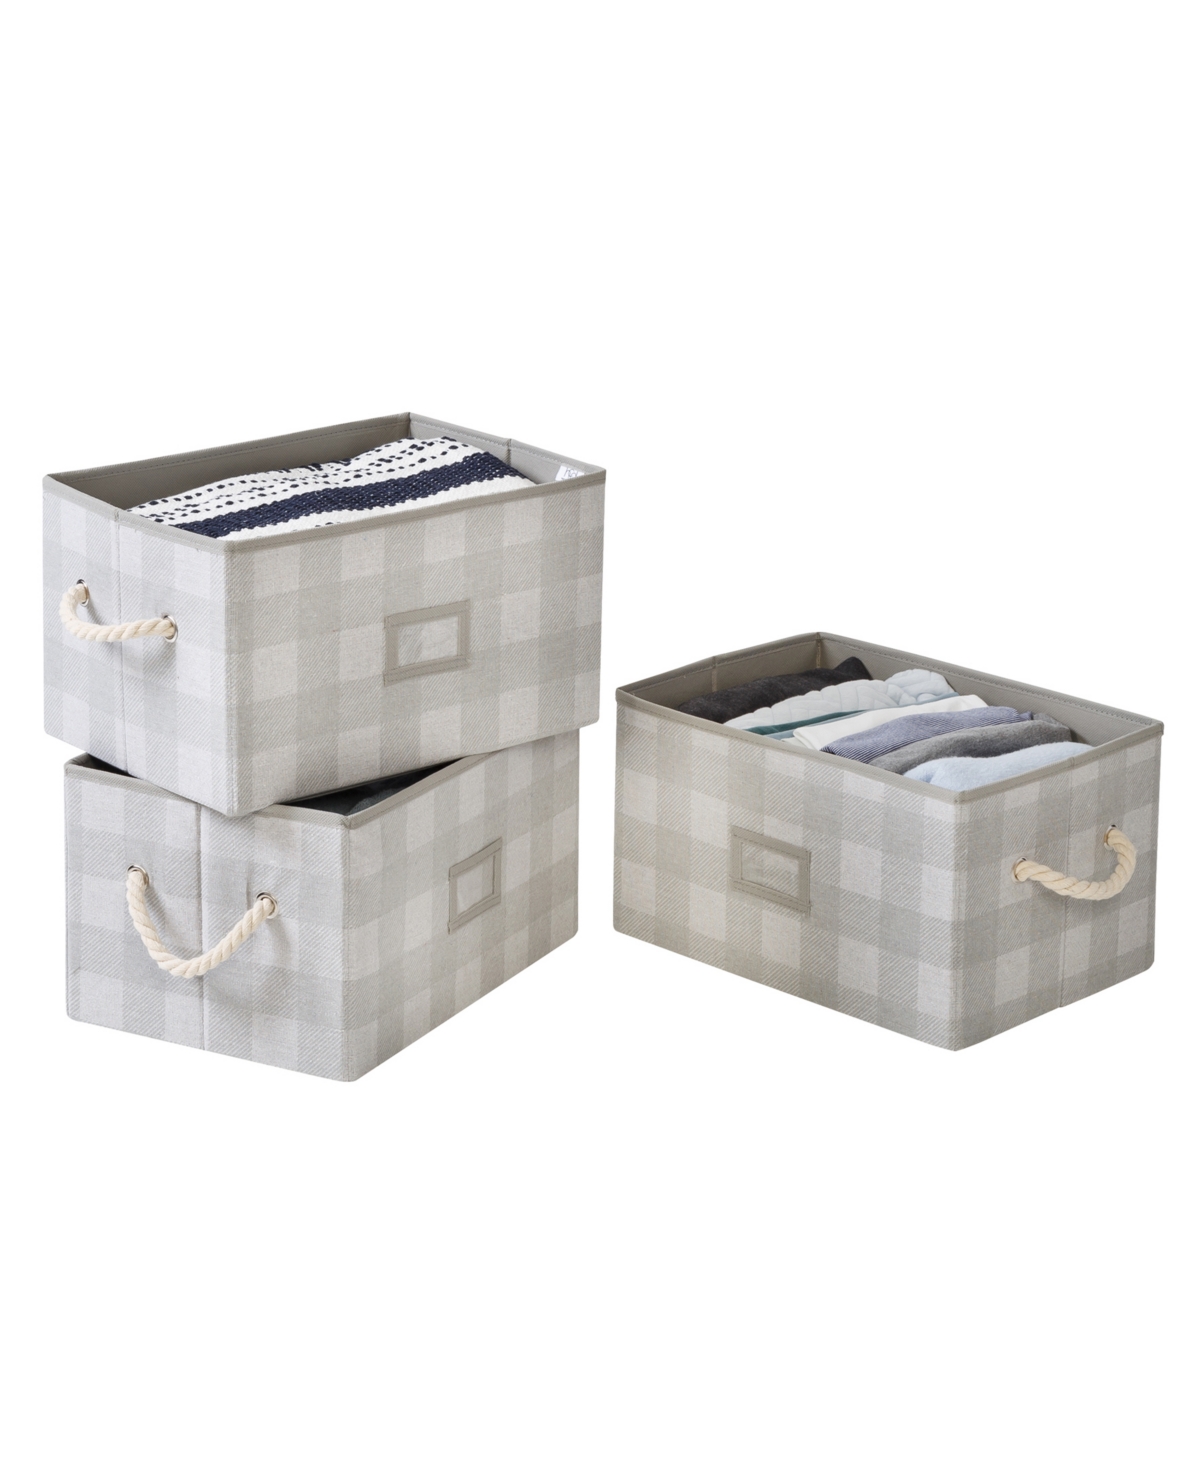 Set of 3 Collapsible Large Fabric Storage Bins with Handles, Plaid - Multi